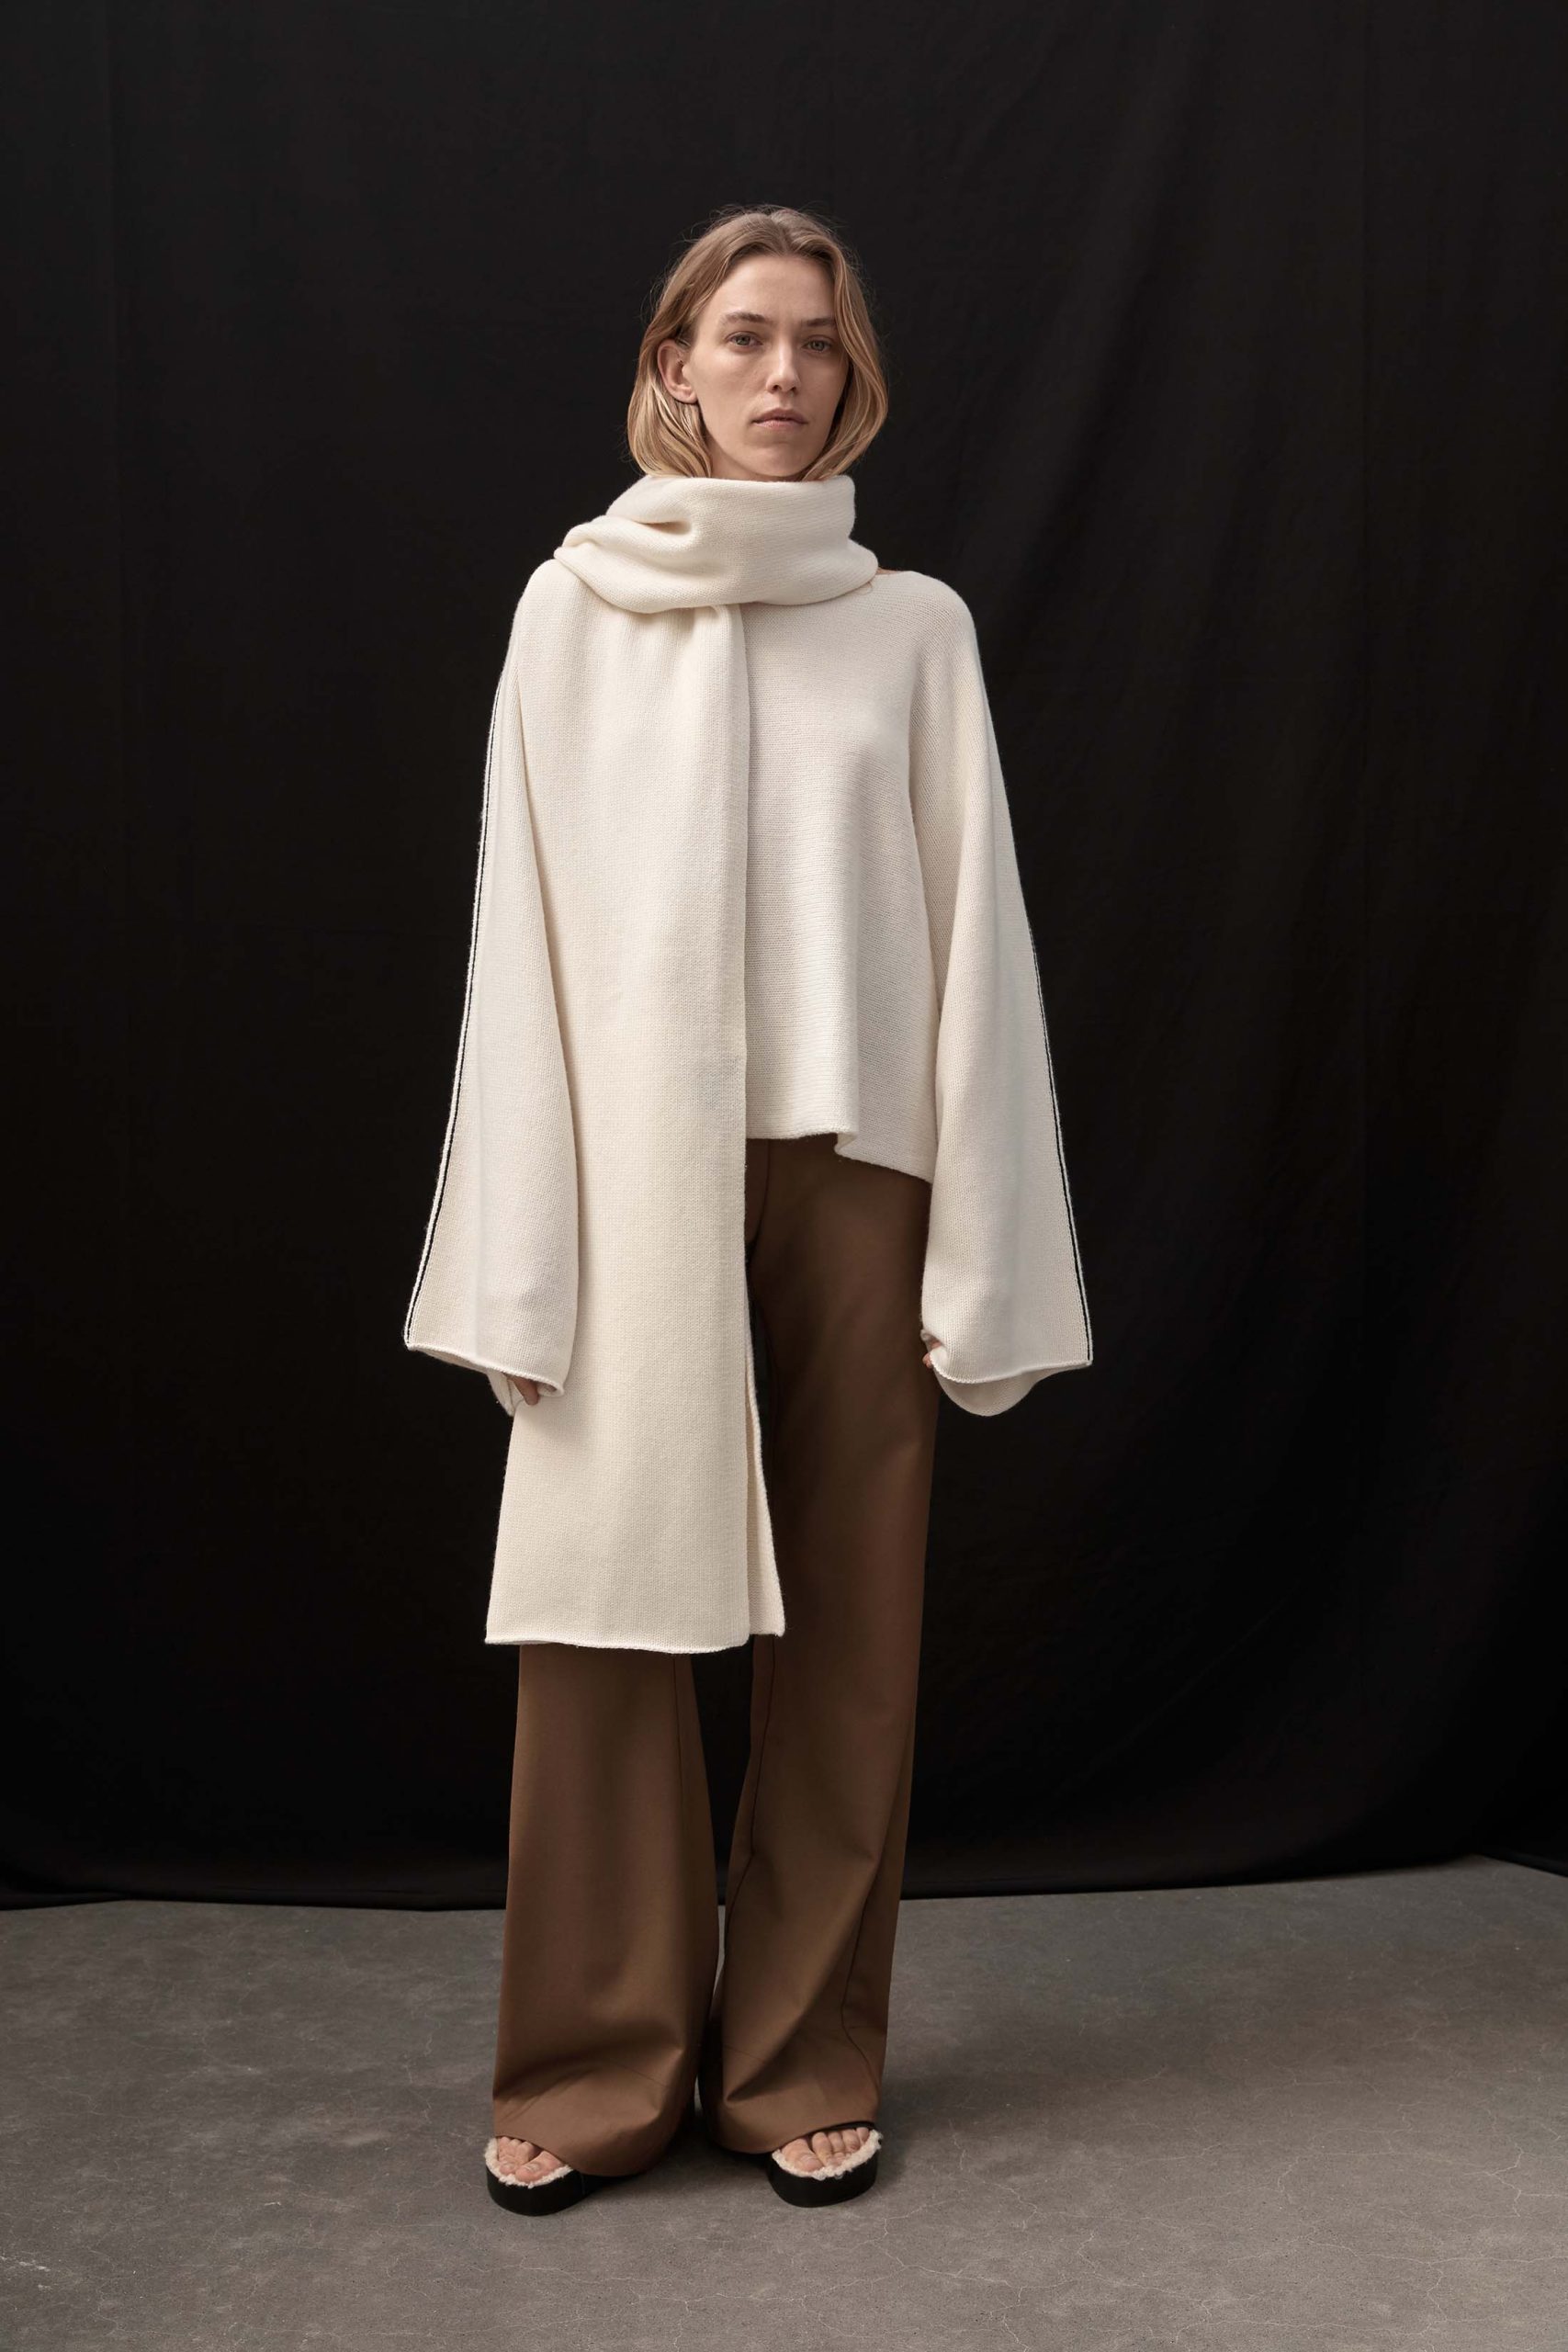 St. Agni 'Air' Fall 2022 Collection | The Impression